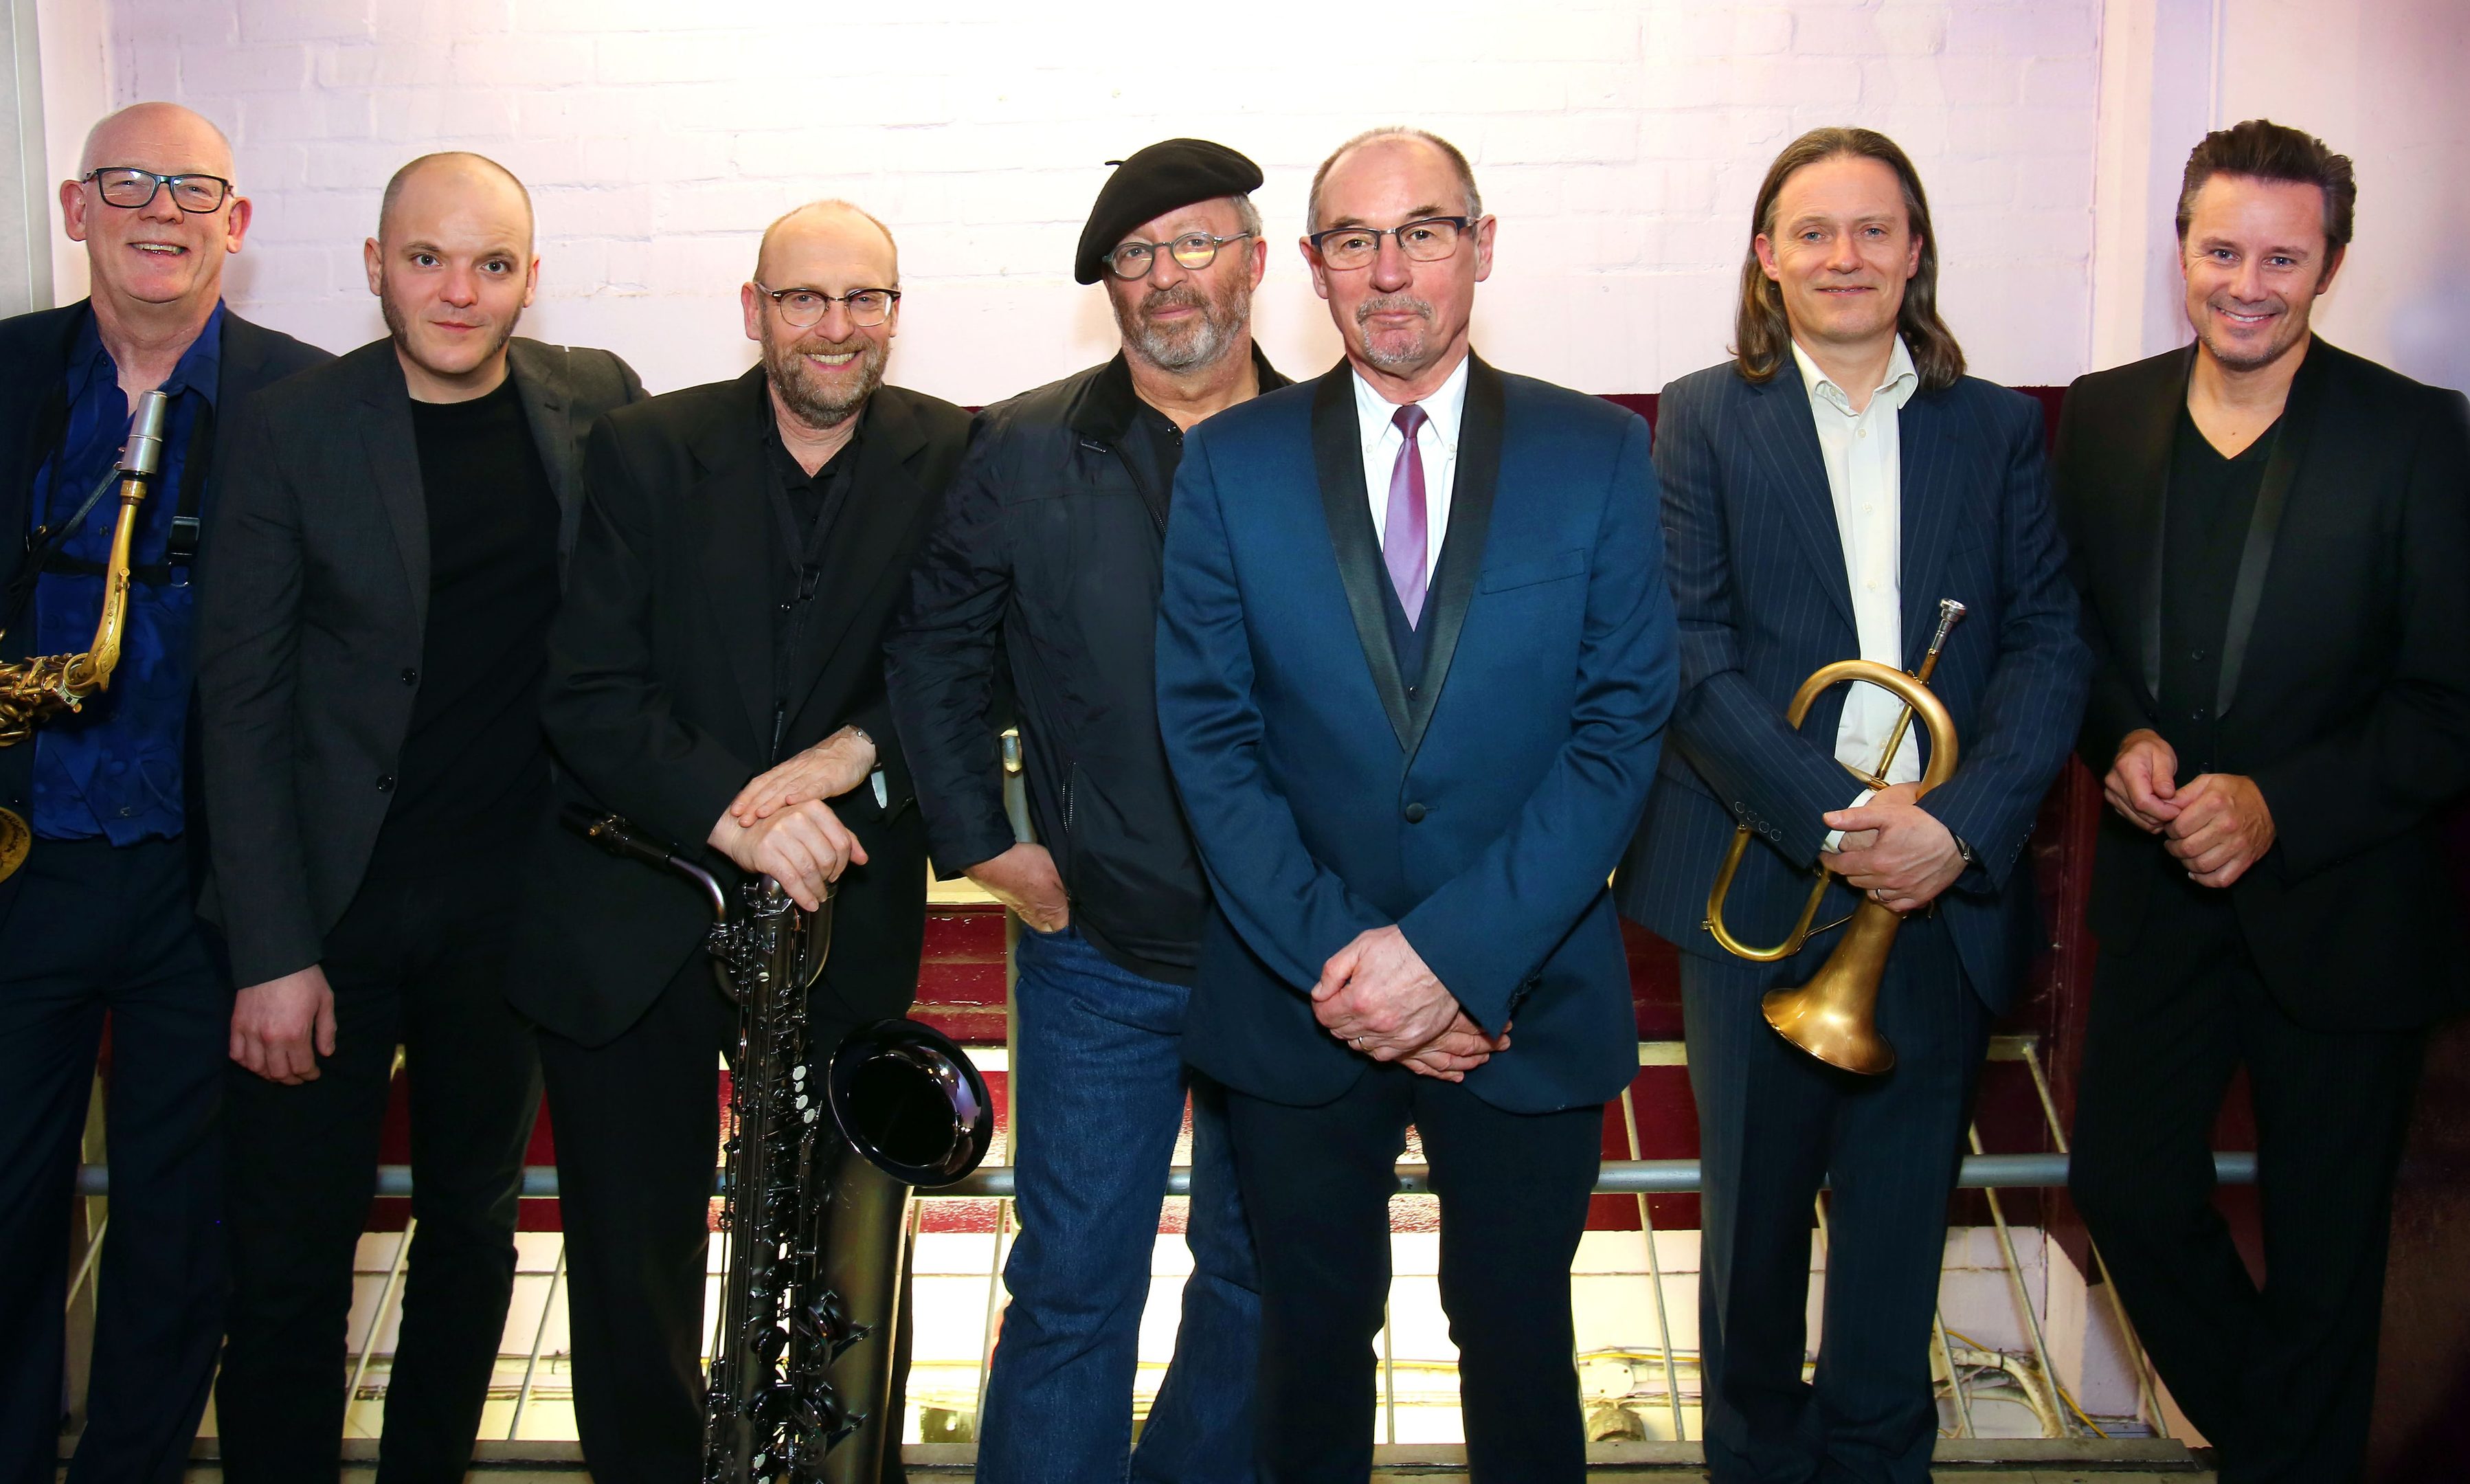 Andy Fairweather Low with the Hi Riders.